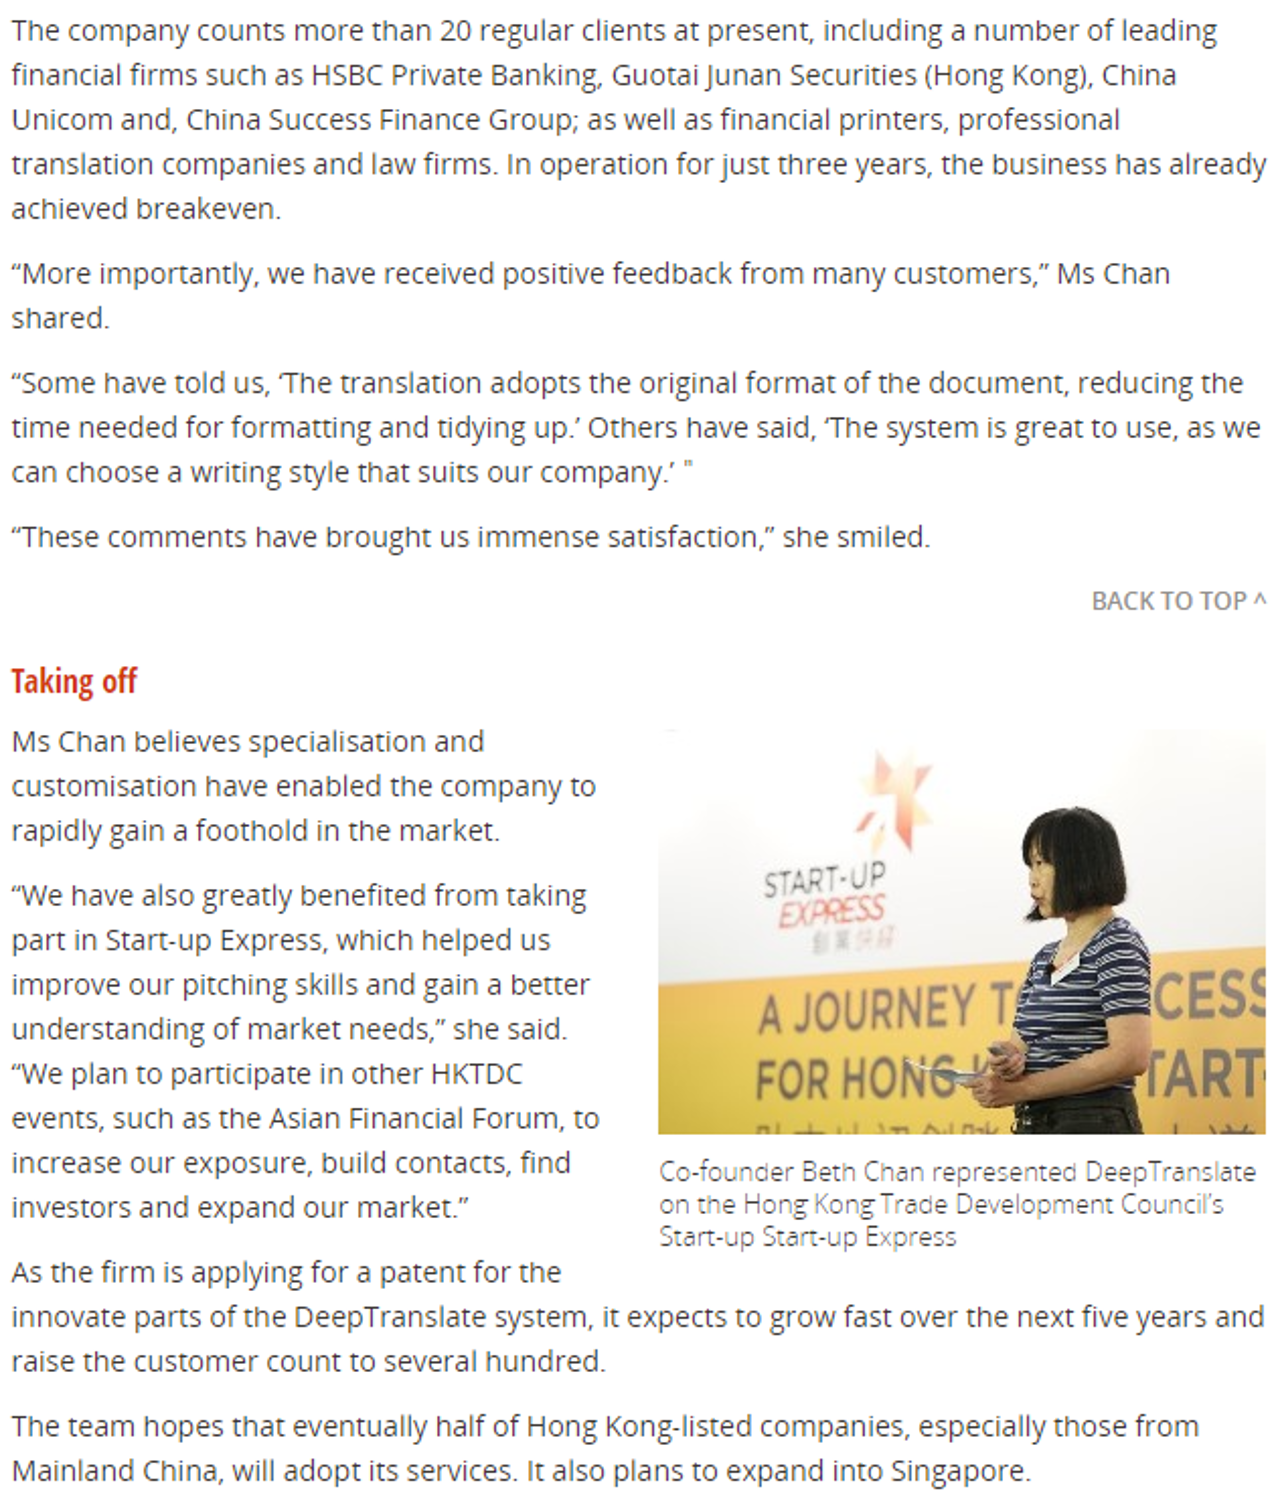 Interview reprint from HKTDC: “Age no issue for entrepreneurs”